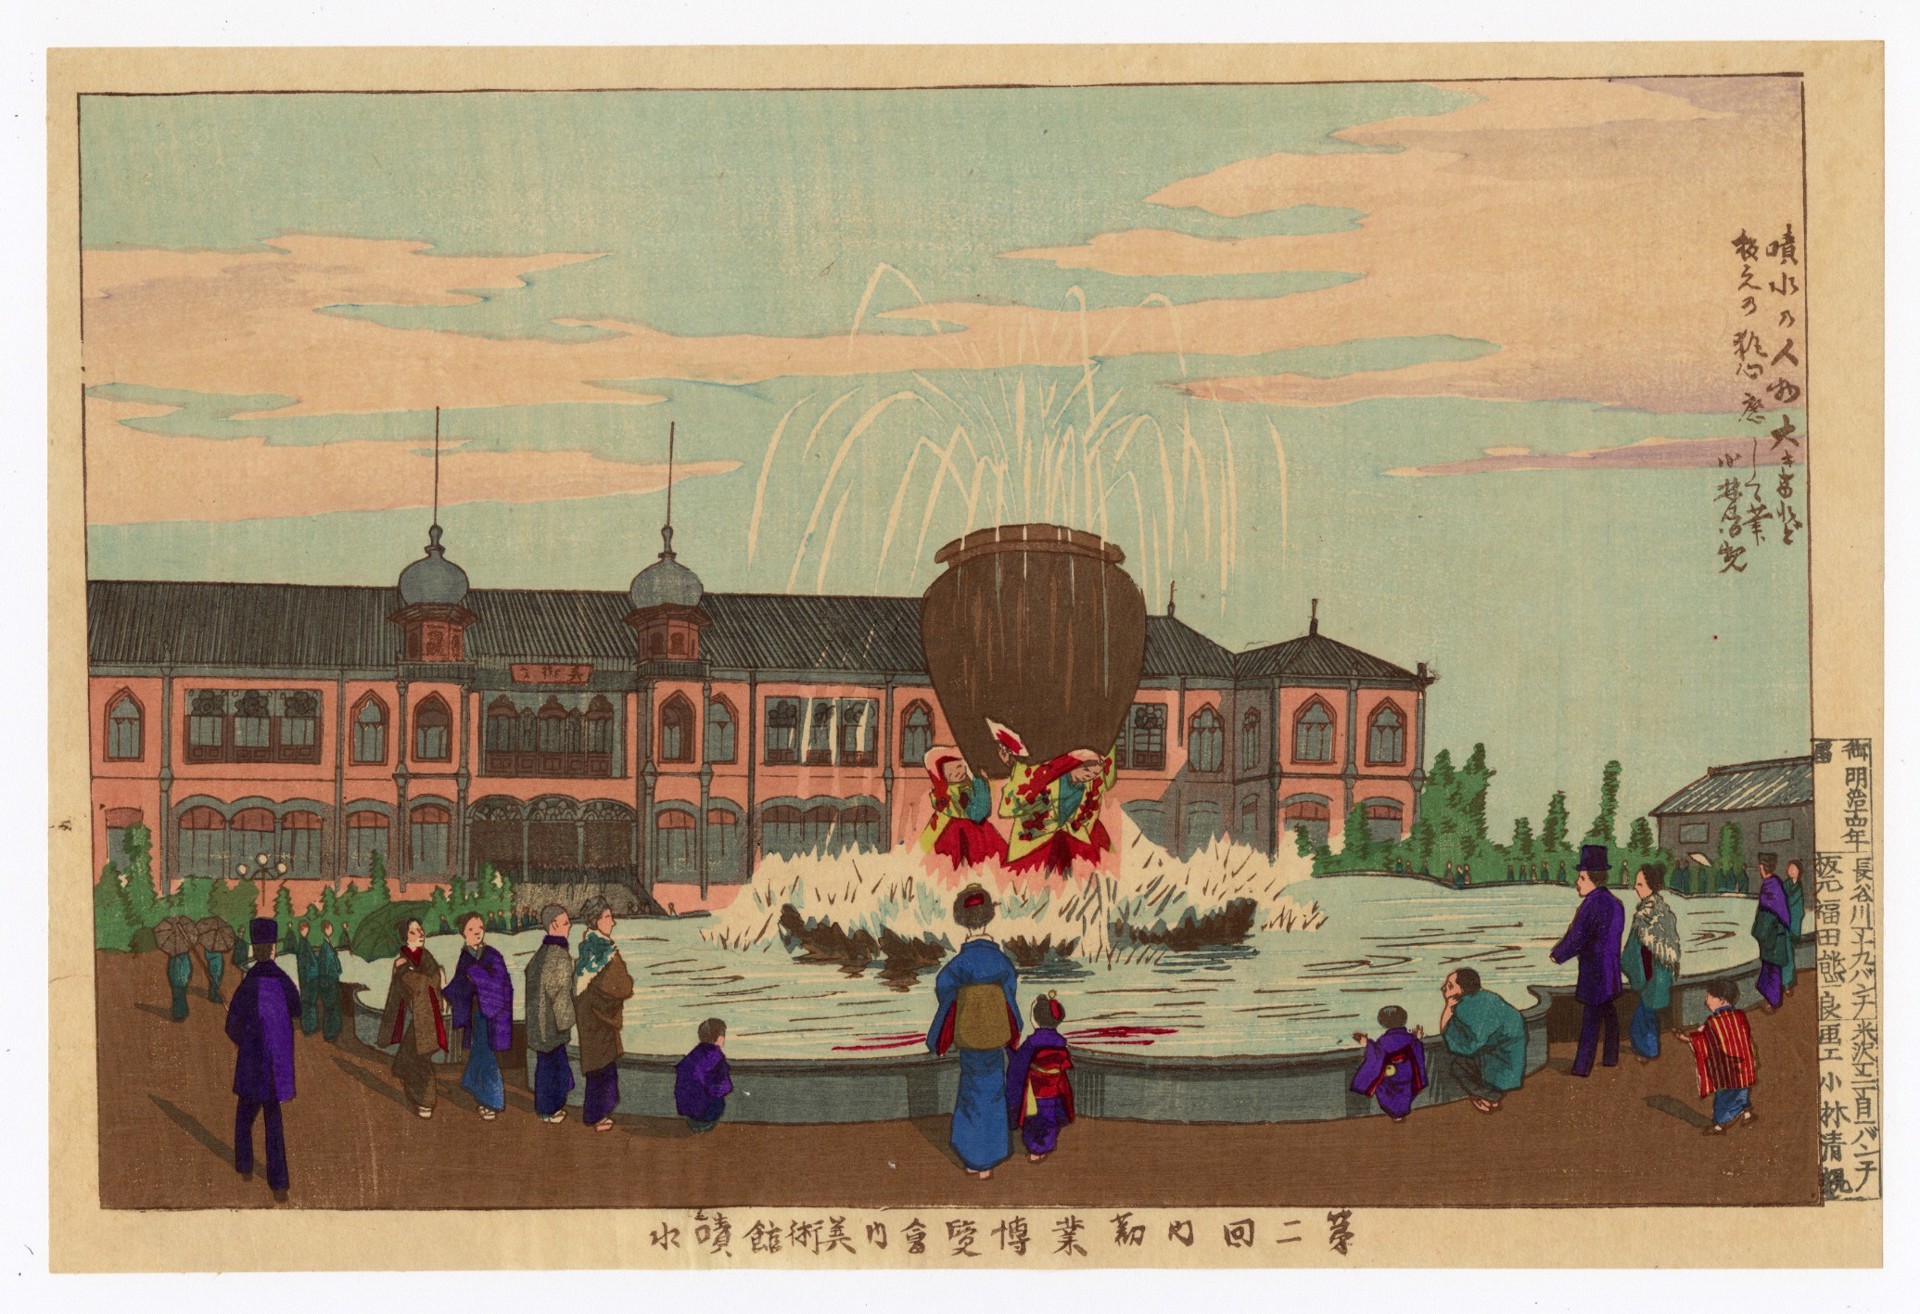 The Fountain in front of the Art Museum for the Promotion of Domestic Industry's 2nd Exhibition by Kiyochika